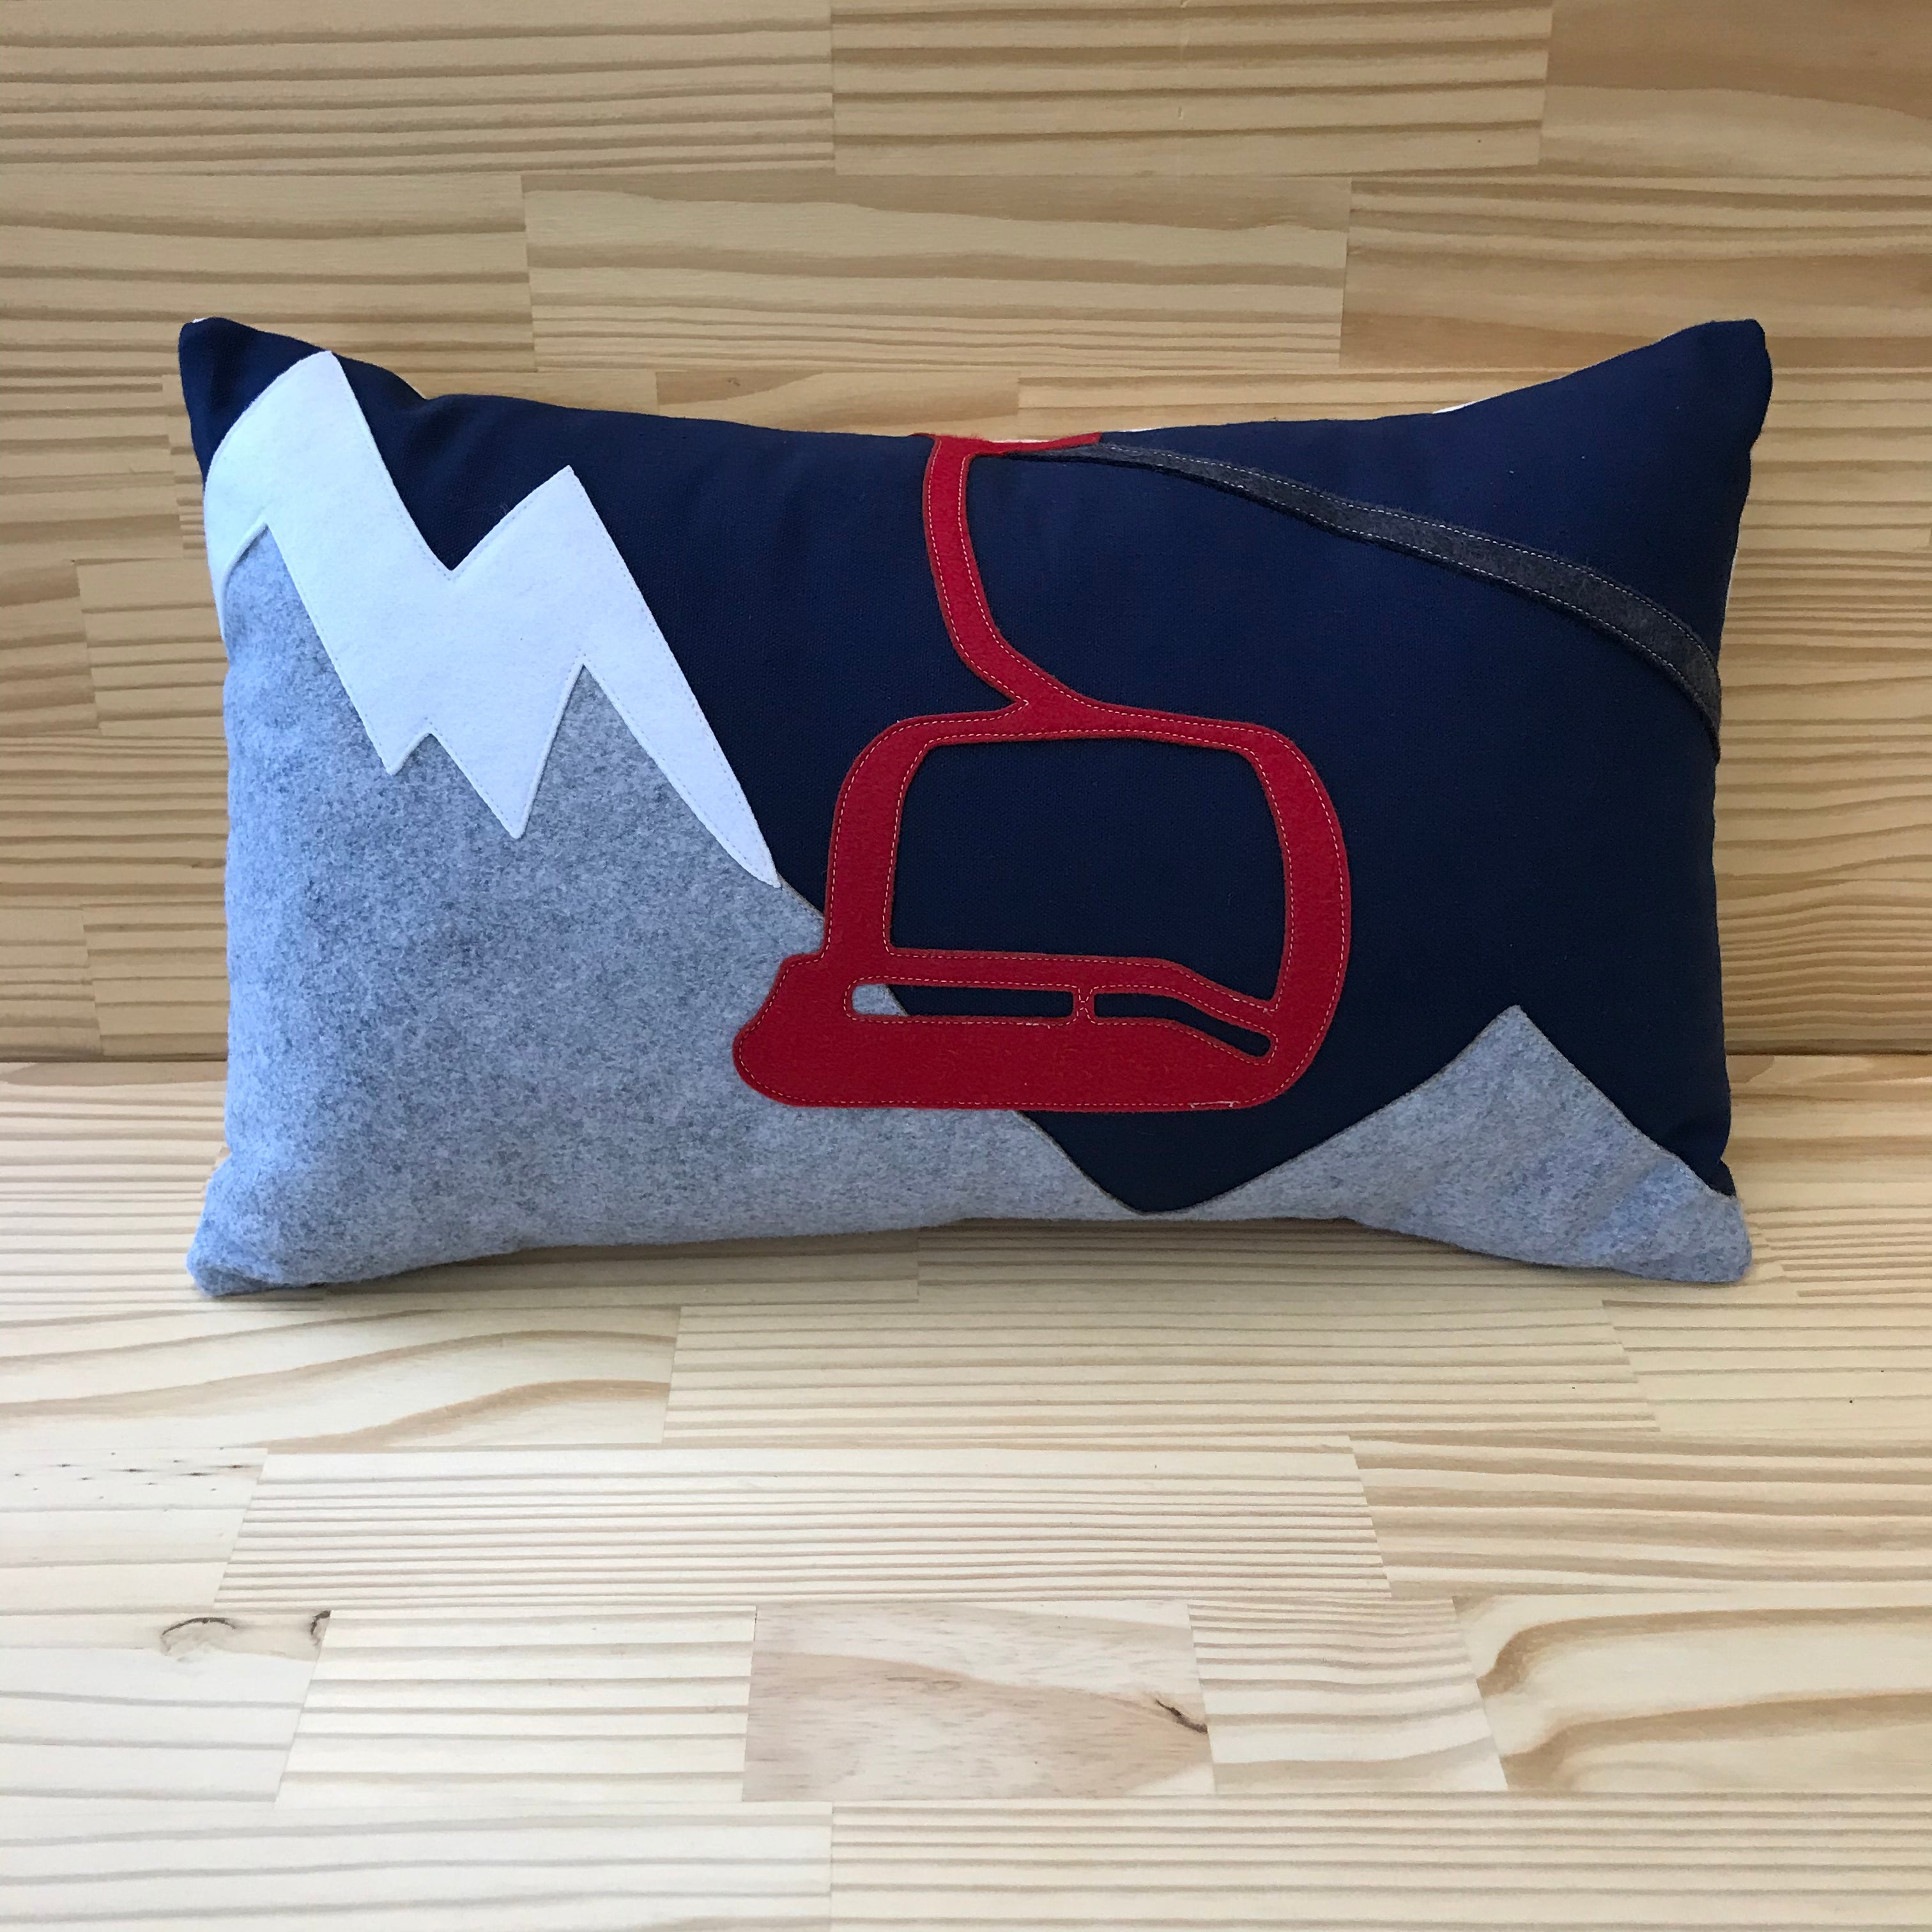 14x21" red chairlift on mountains lumbar pillow, navy